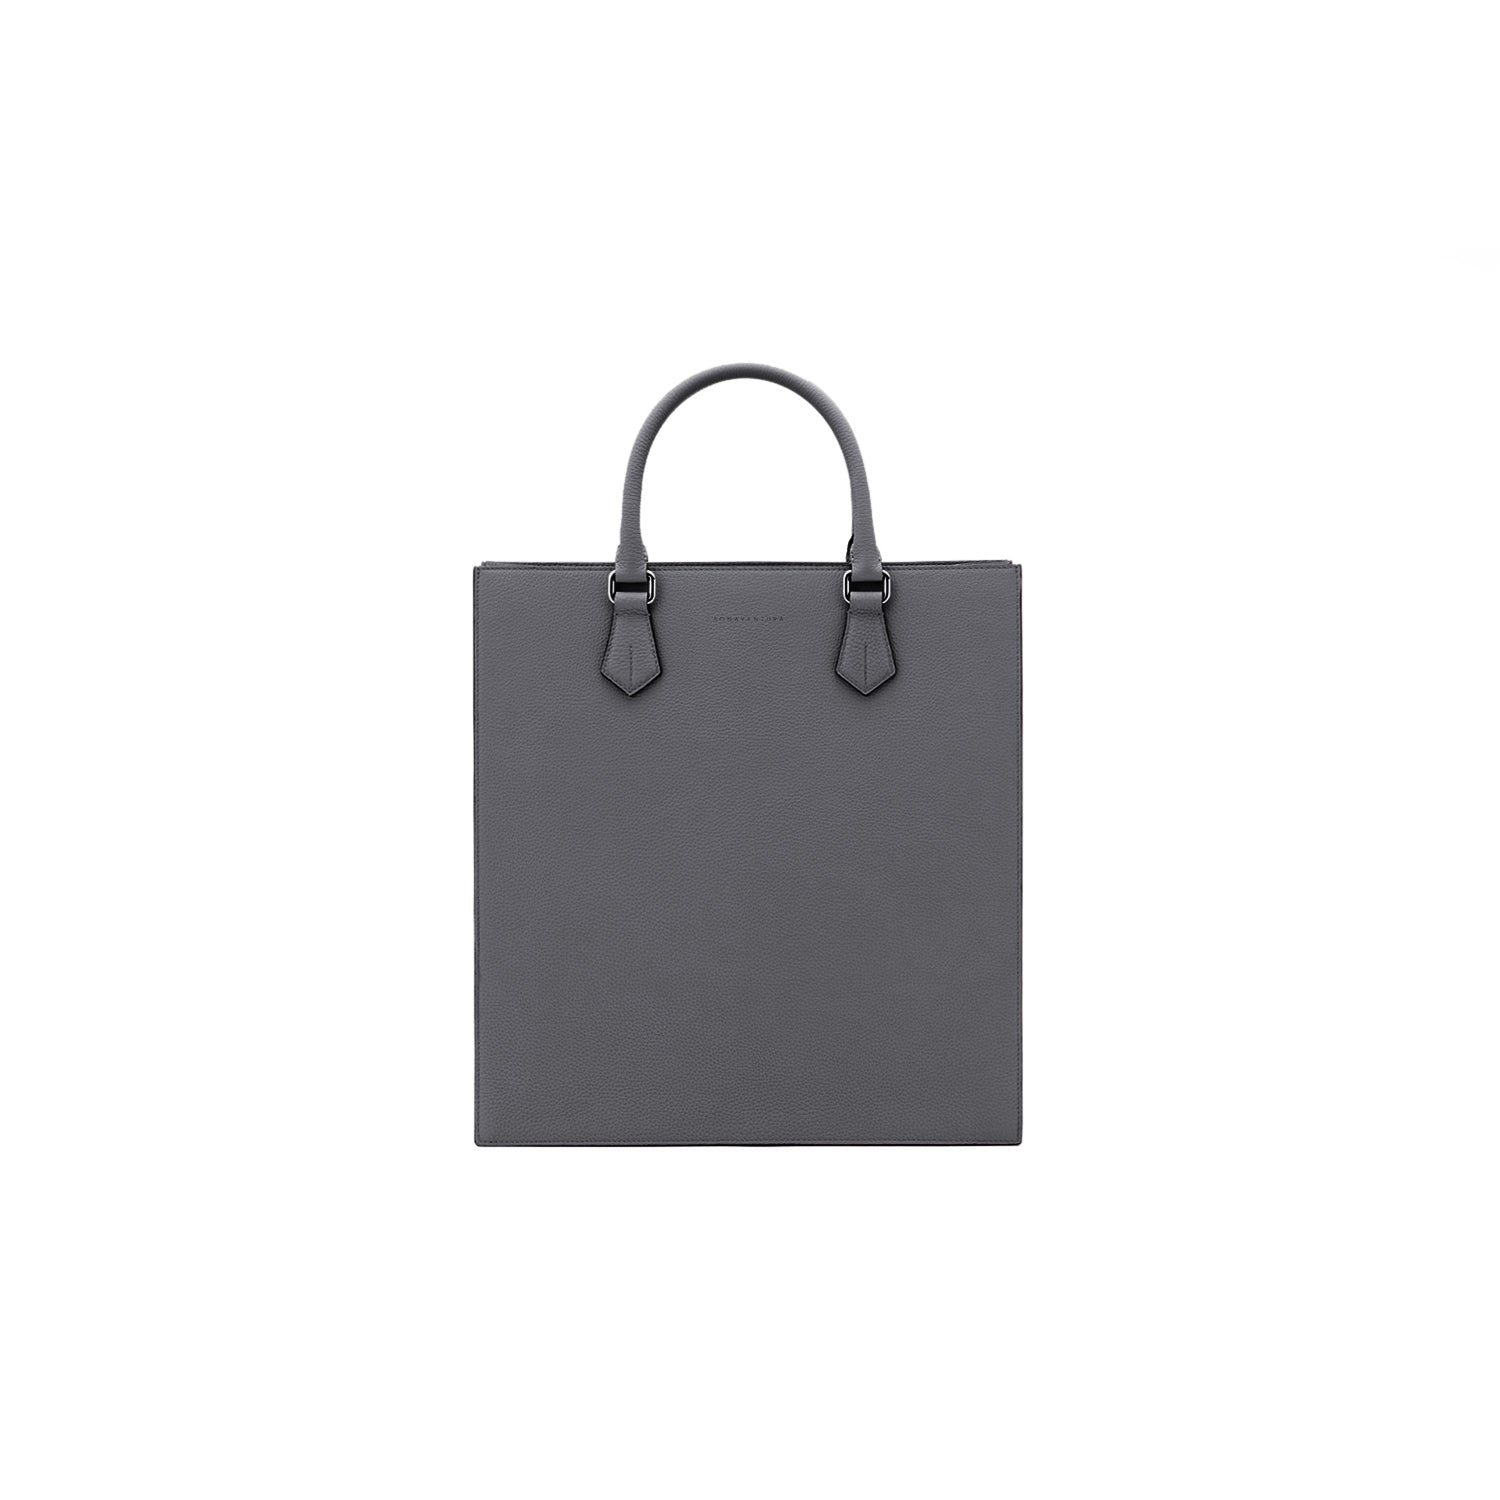 Marco Tote Bag in Shrink Leather